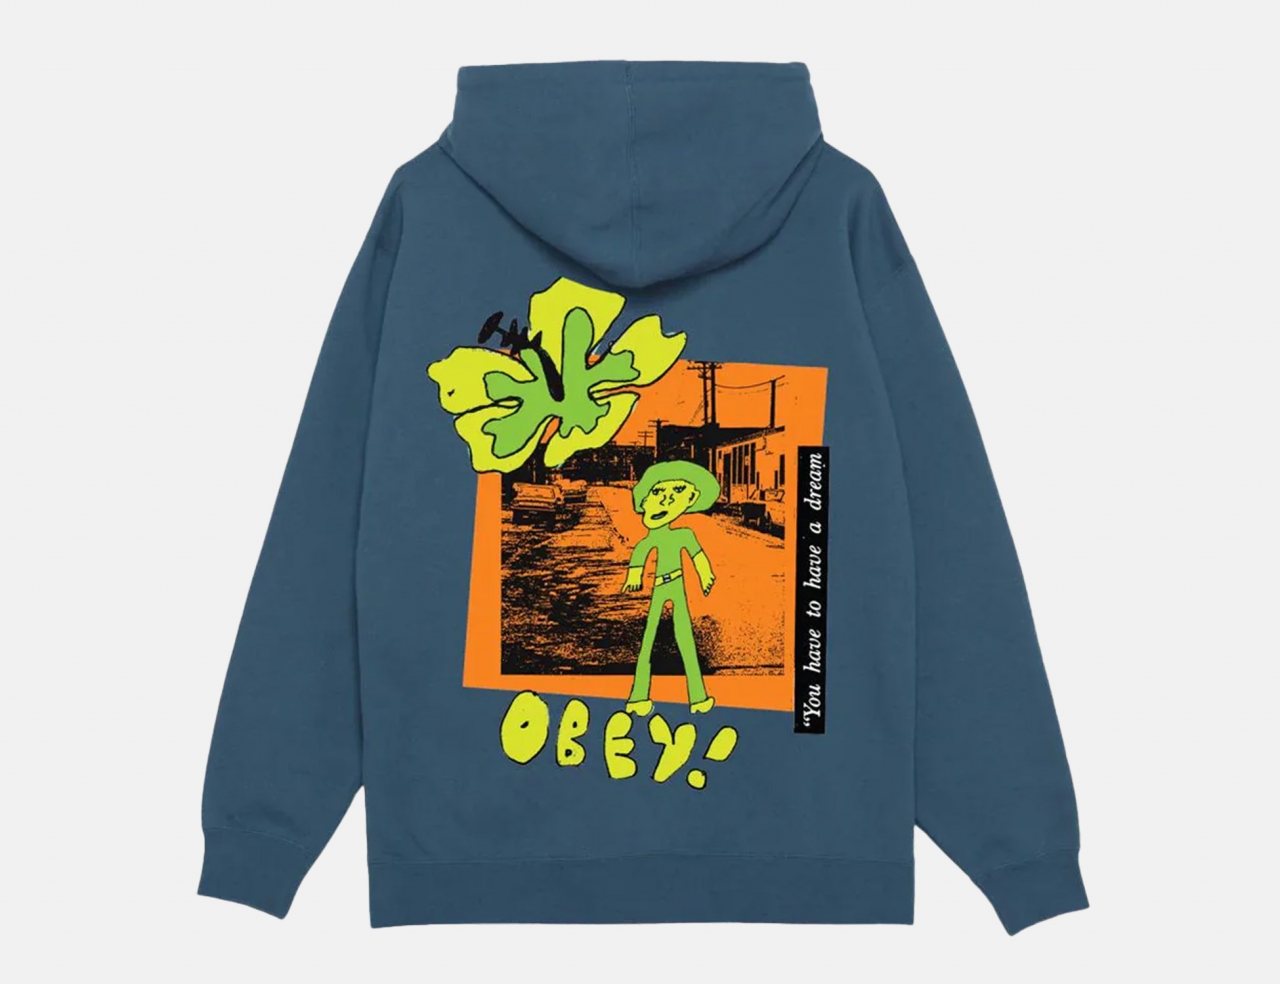 Obey You Have To Have A Dream Fleece Hoodie - Coronet Blue